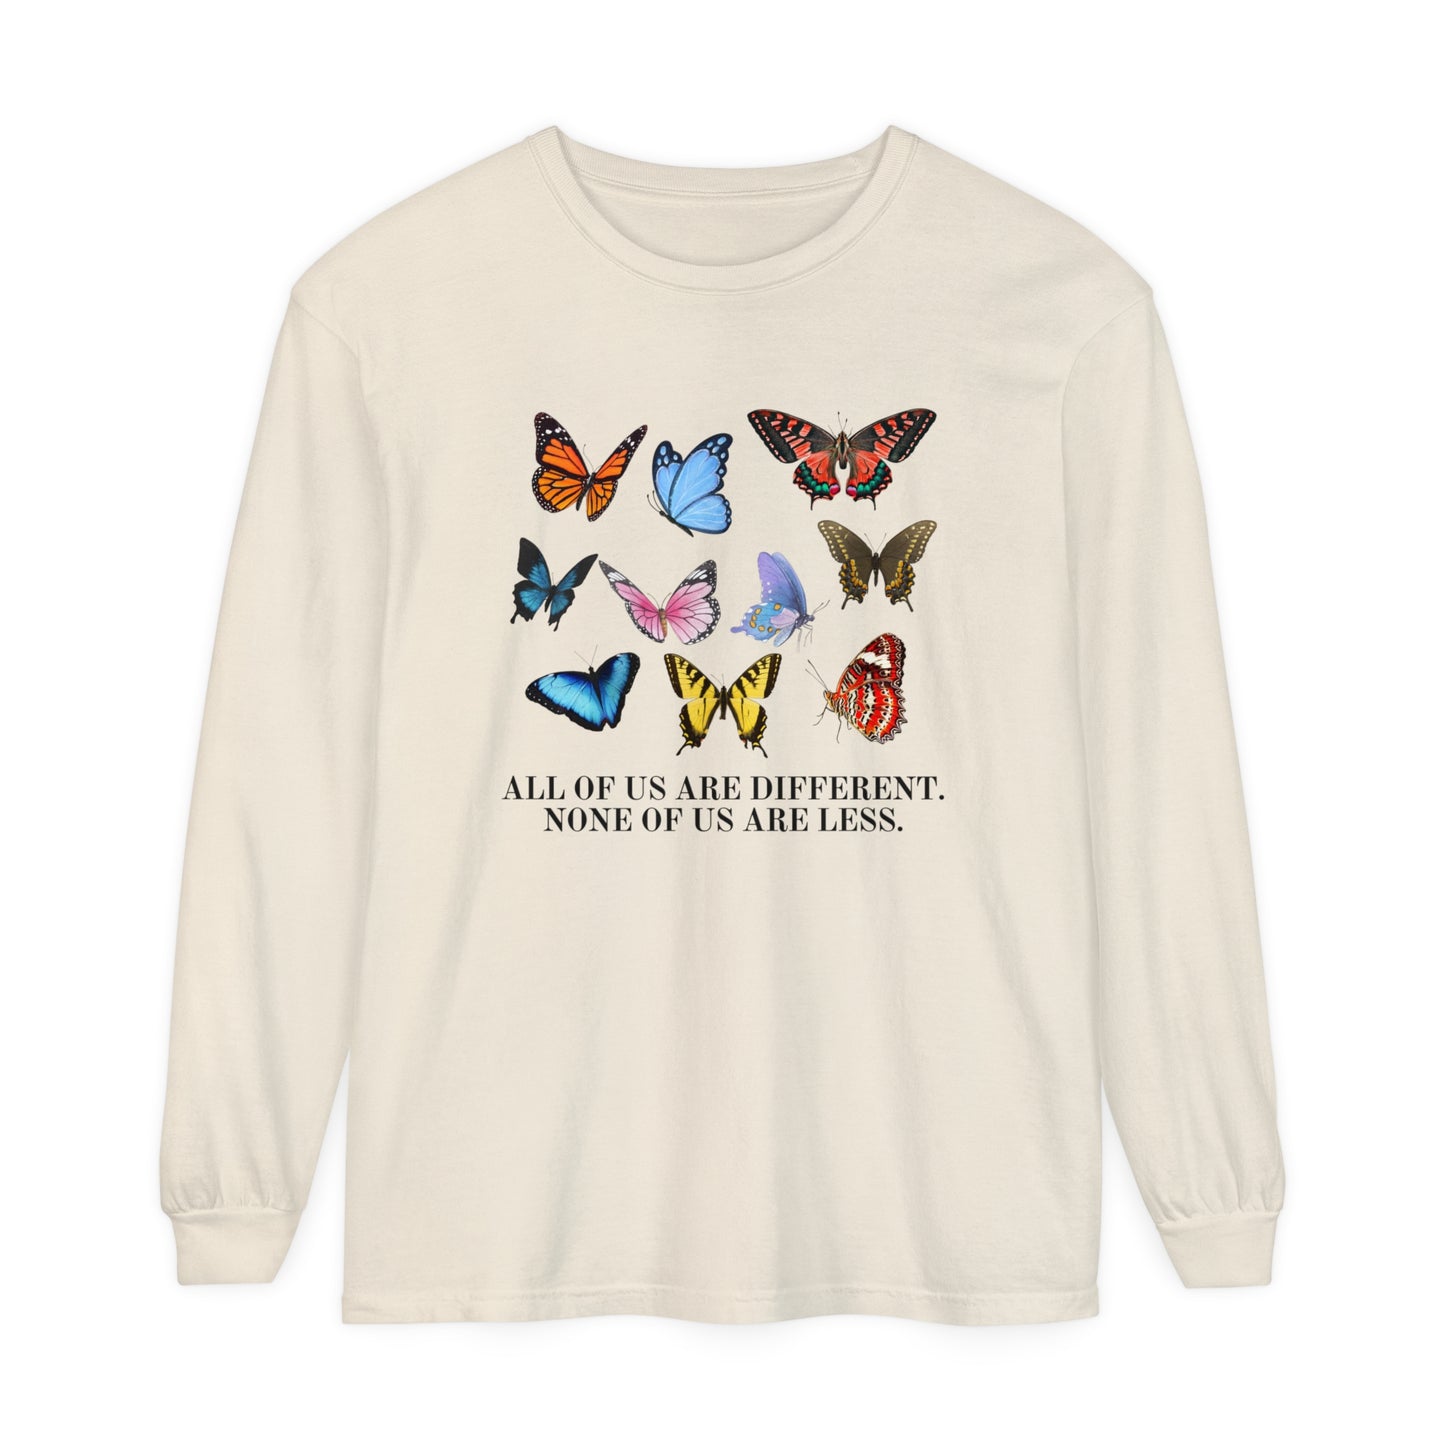 All of Us Are Different Long Sleeve Comfort Colors T-Shirt